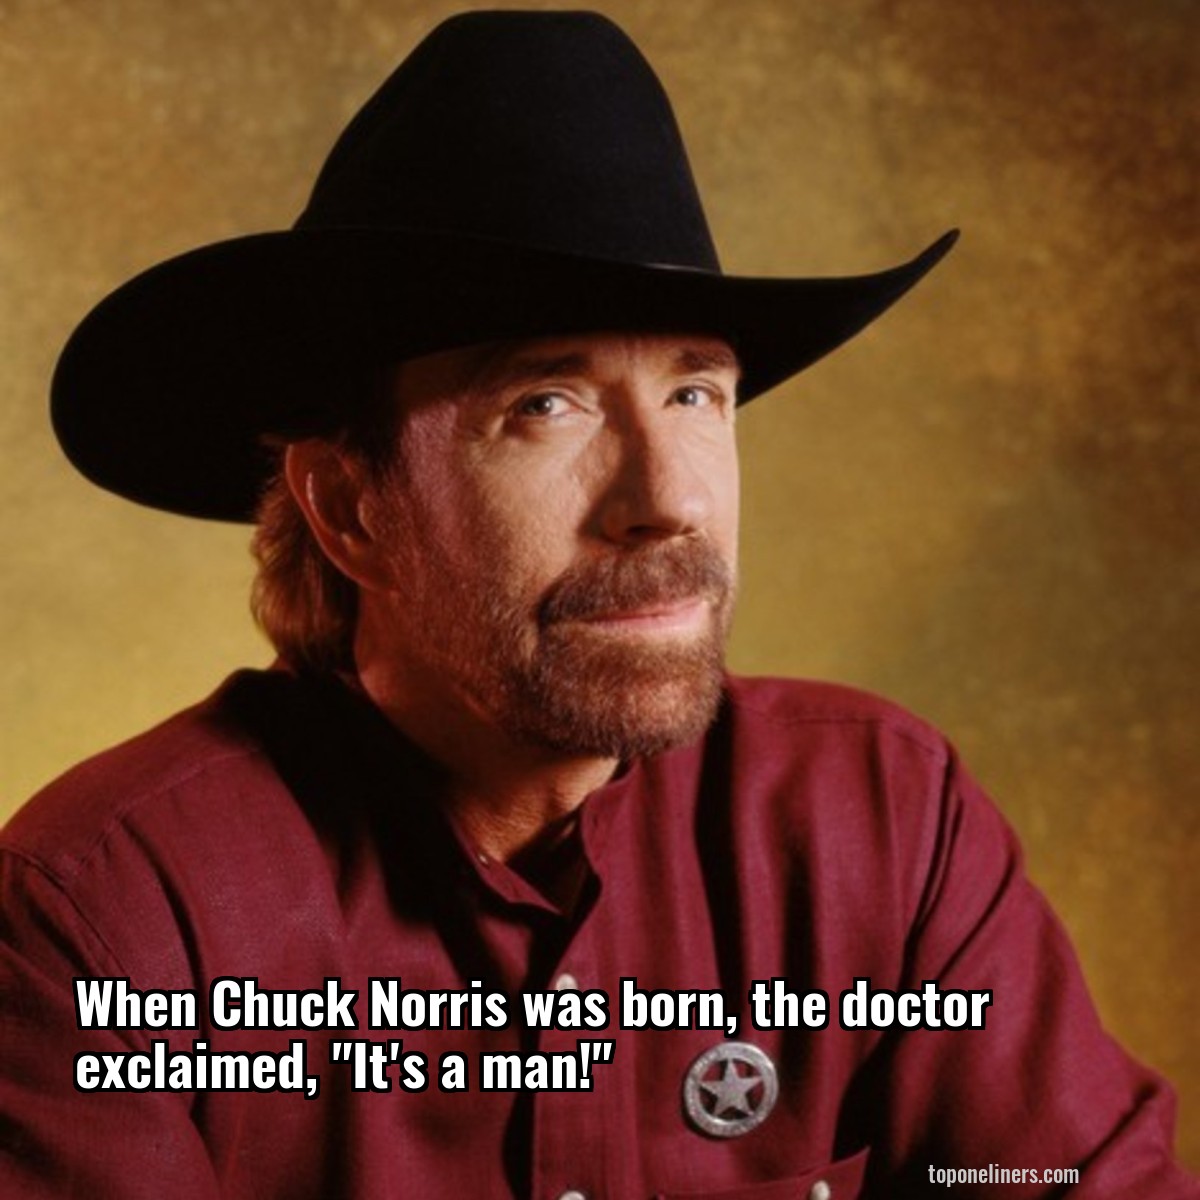 When Chuck Norris was born, the doctor exclaimed, "It's a man!"